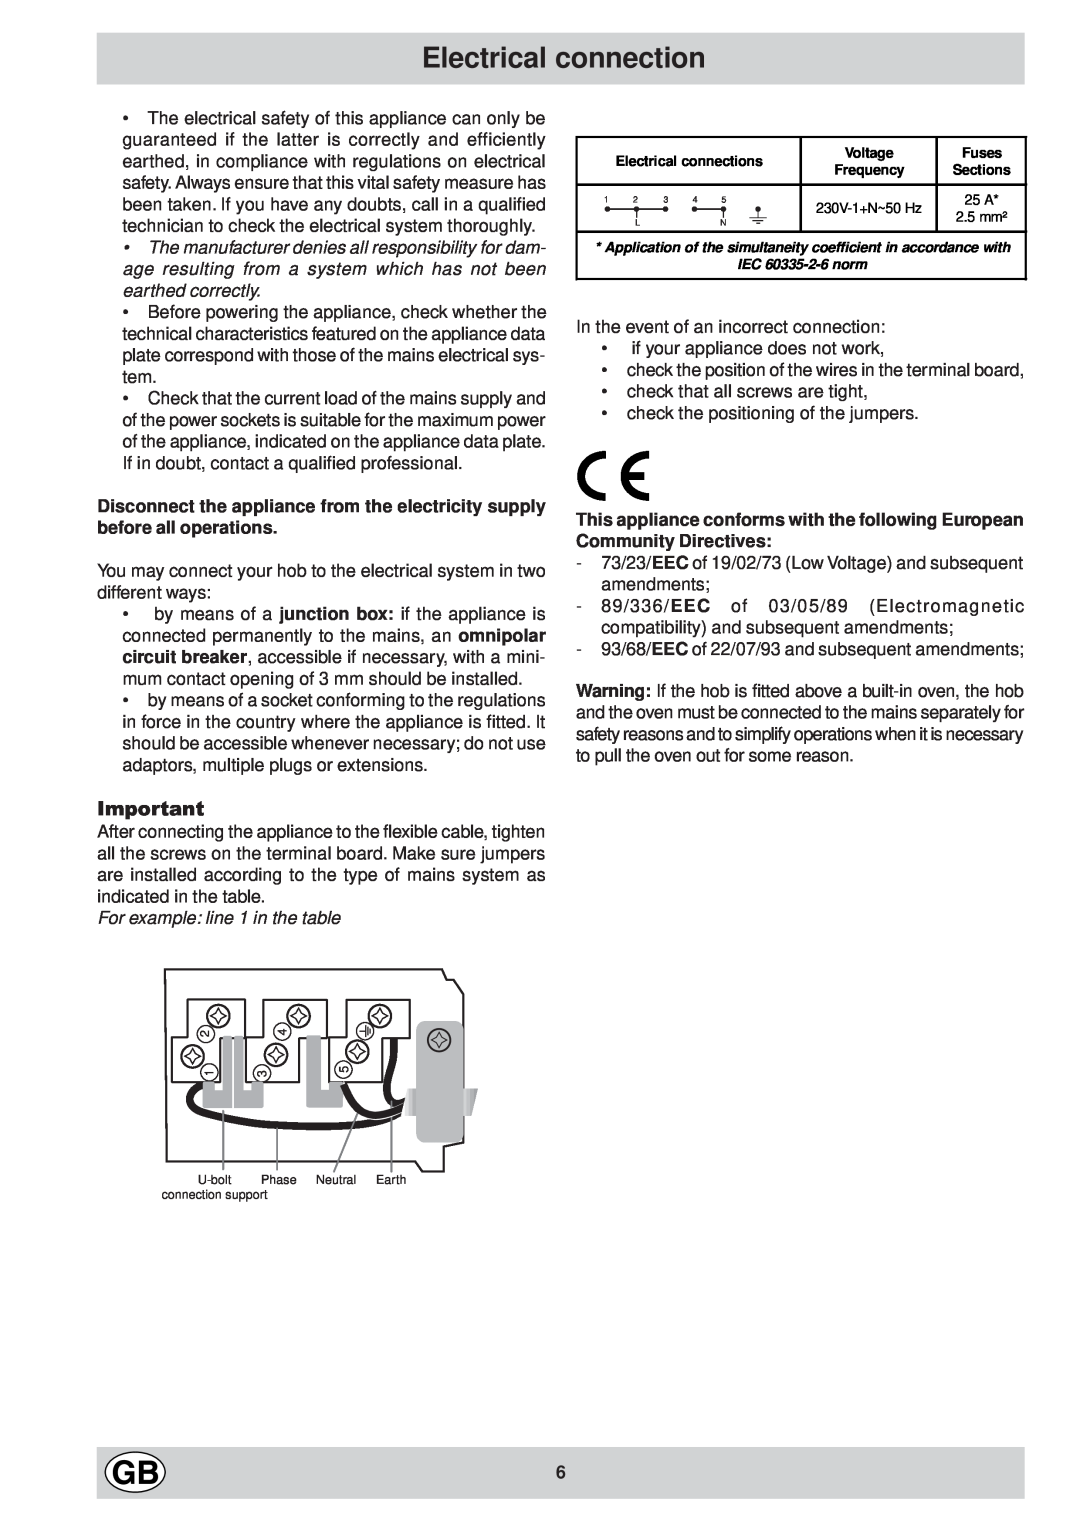 Hotpoint EC6005 manual Electrical connection, For example line 1 in the table 